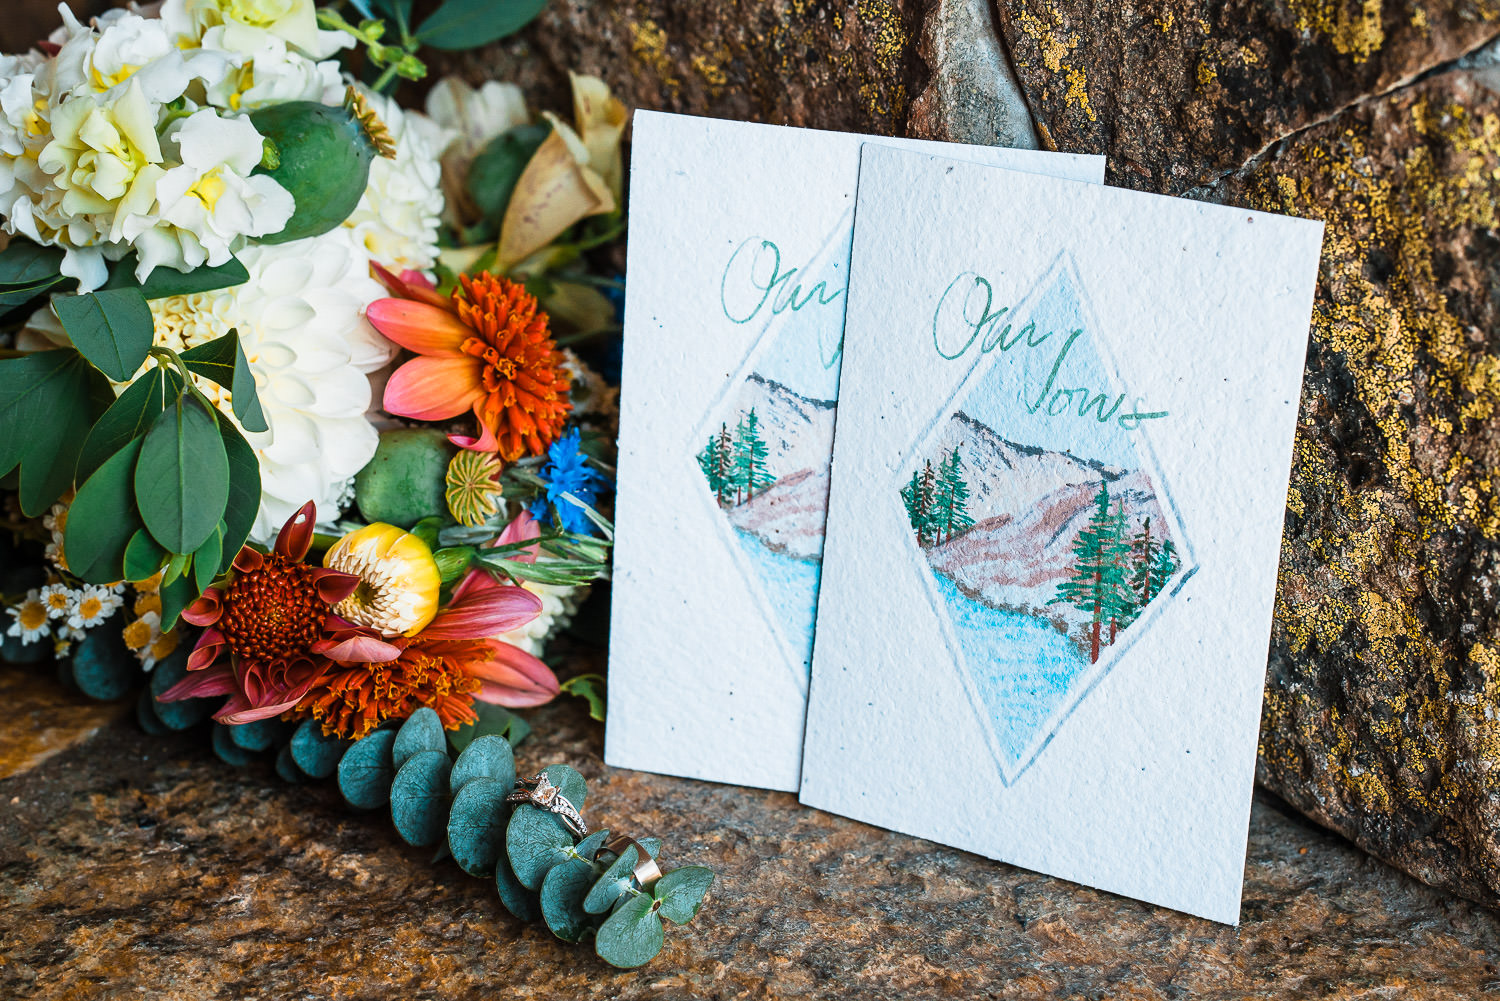 Colorado Blue Lakes Elopement | Run Wild With Me Photography